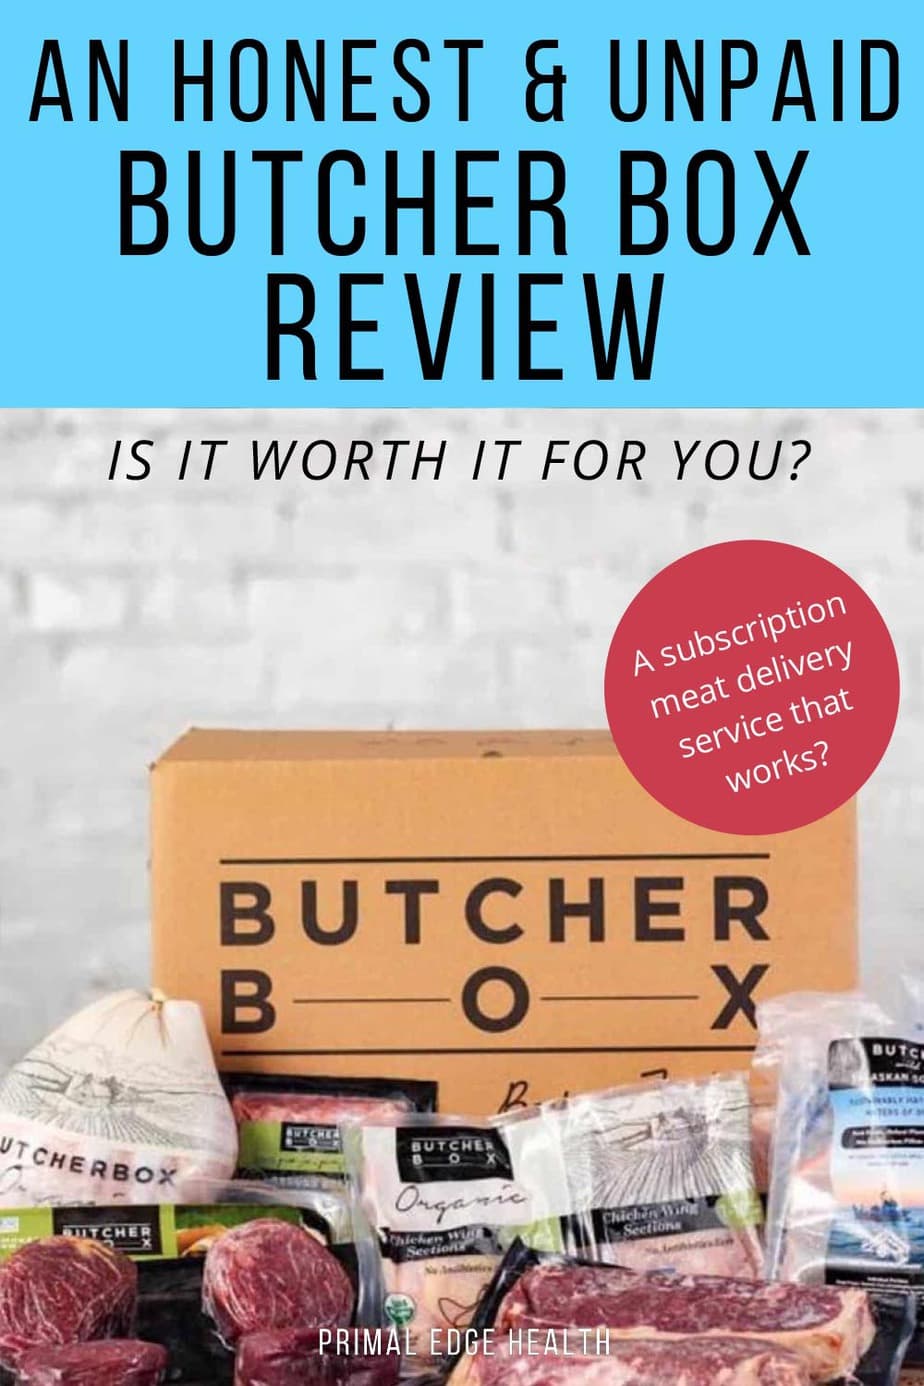 https://www.primaledgehealth.com/wp-content/uploads/2021/08/butcherbox-review-PIN.jpg